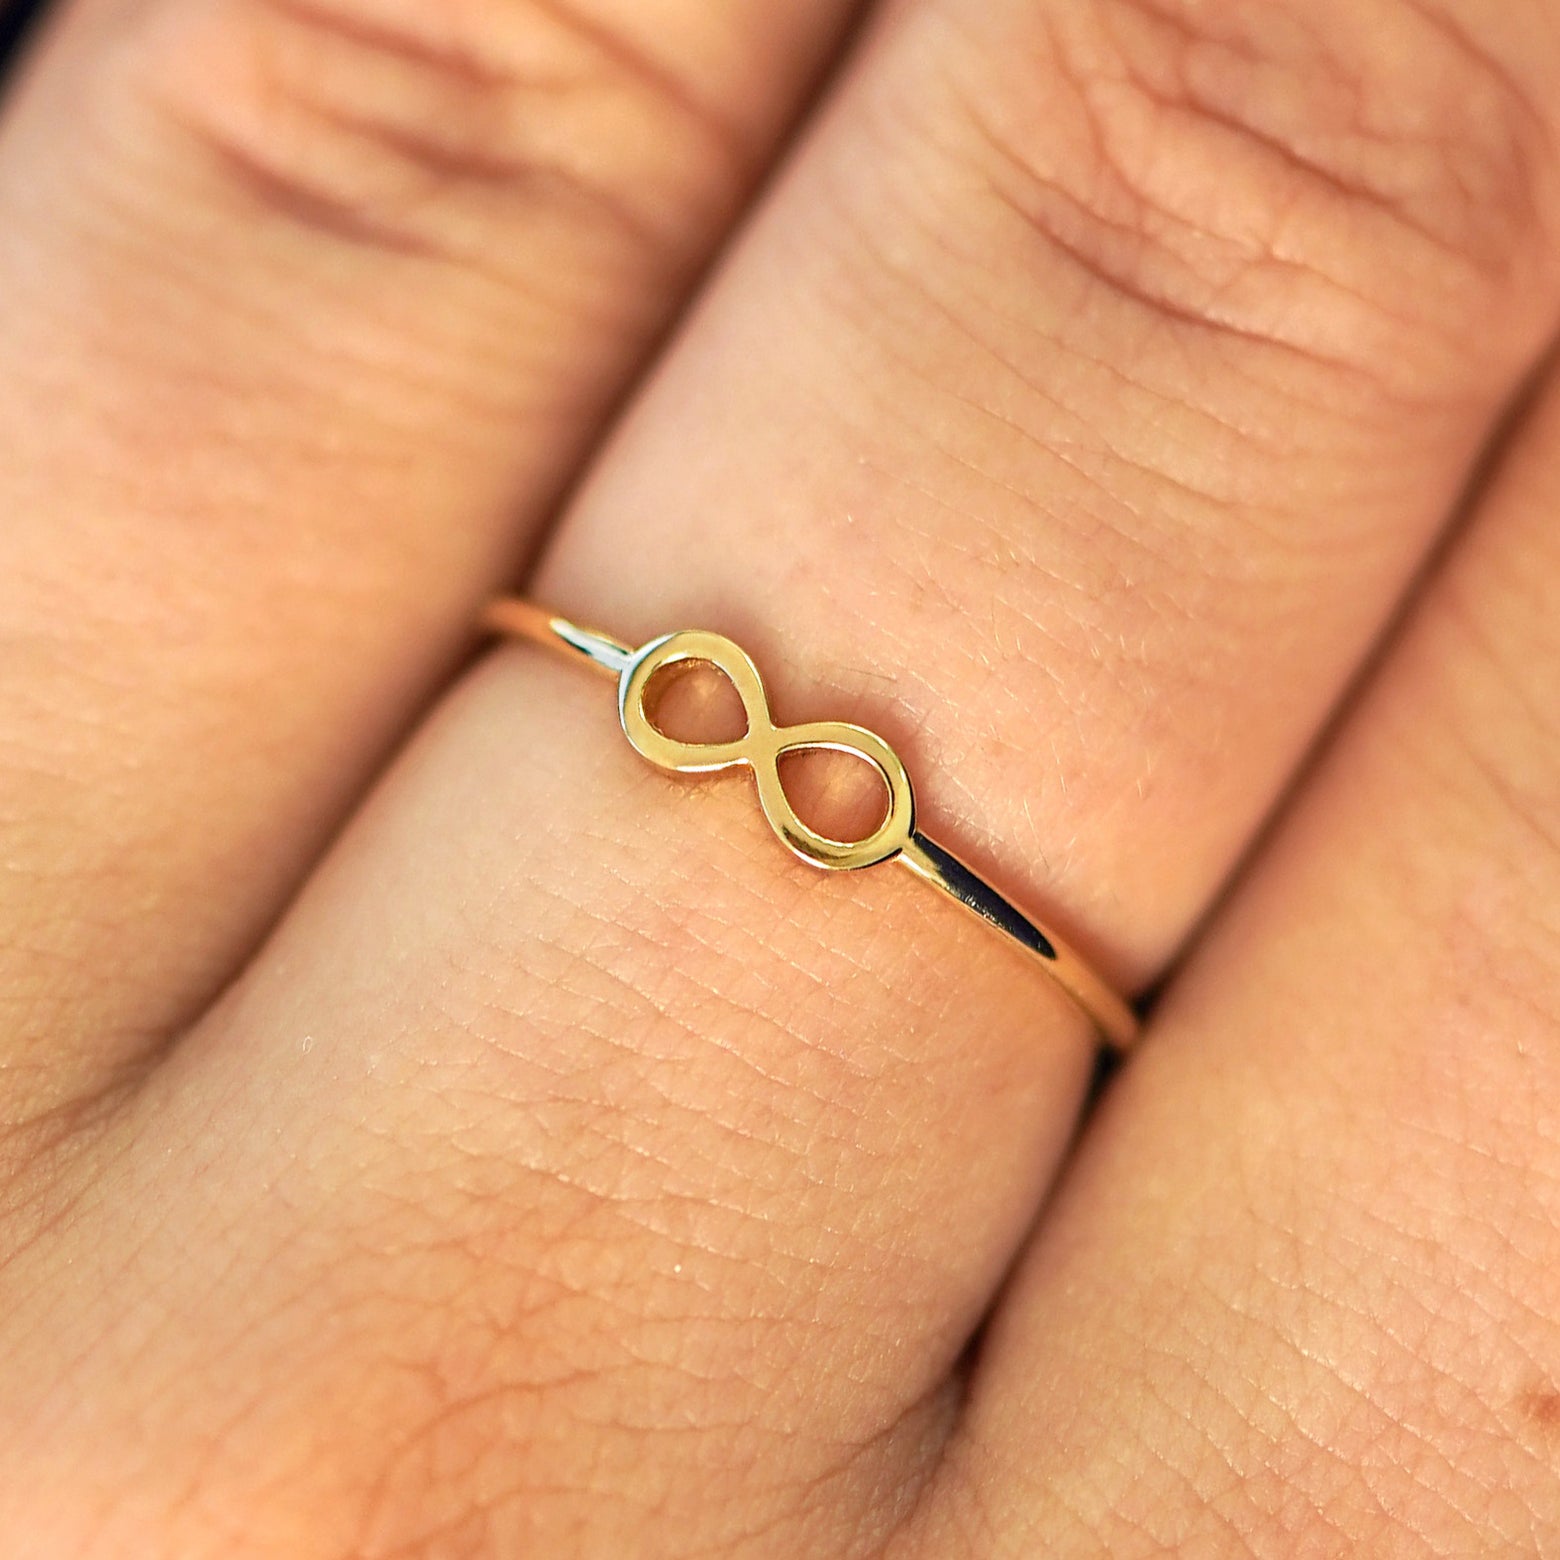 Close up view of a model's fingers wearing a 14k gold Infinity Ring